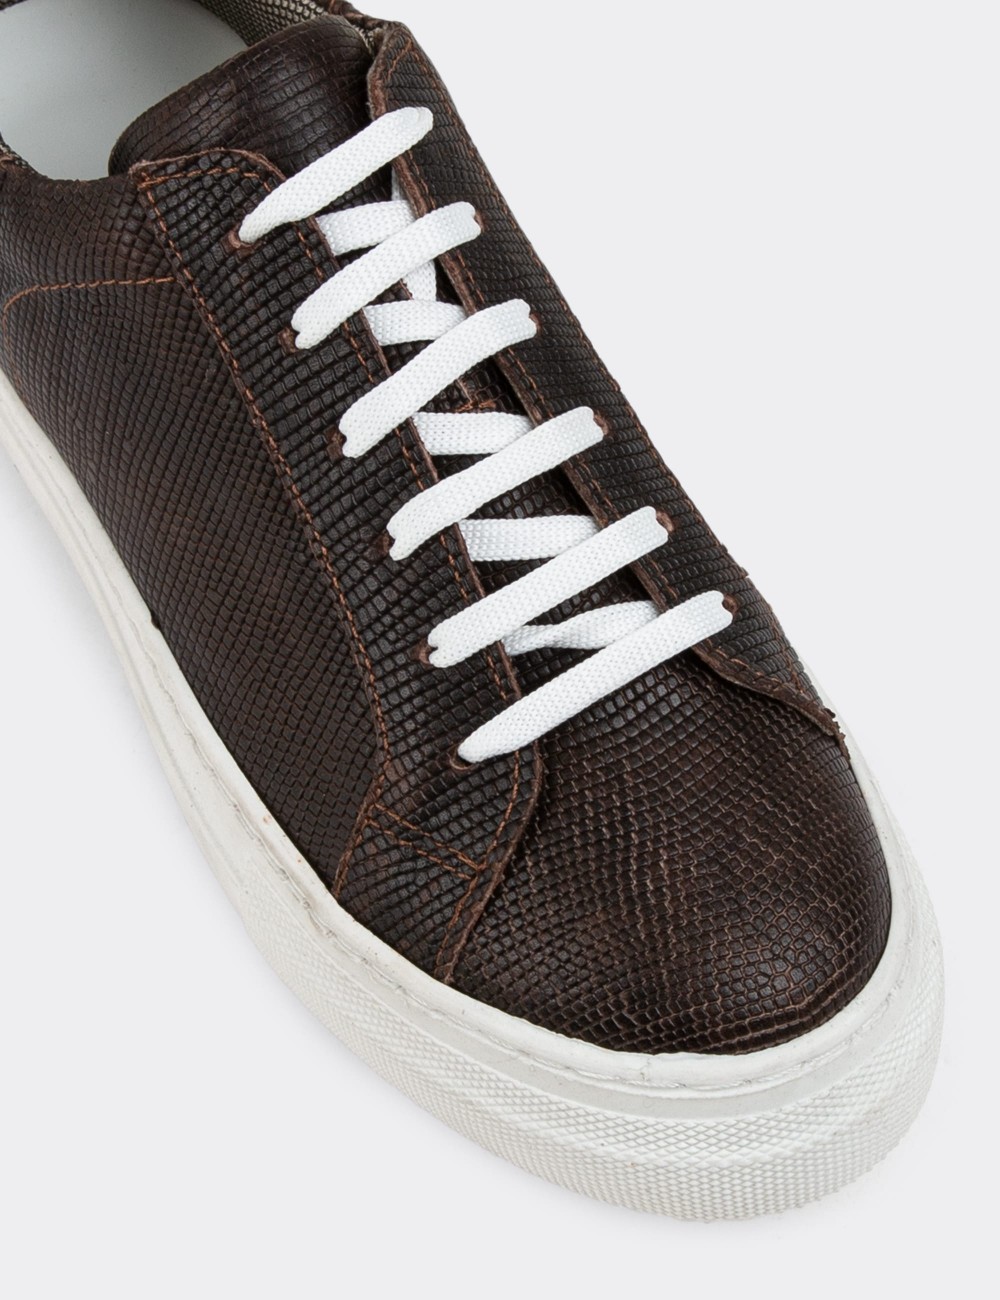 Brown Leather Sneakers - Z1681ZKHVC38